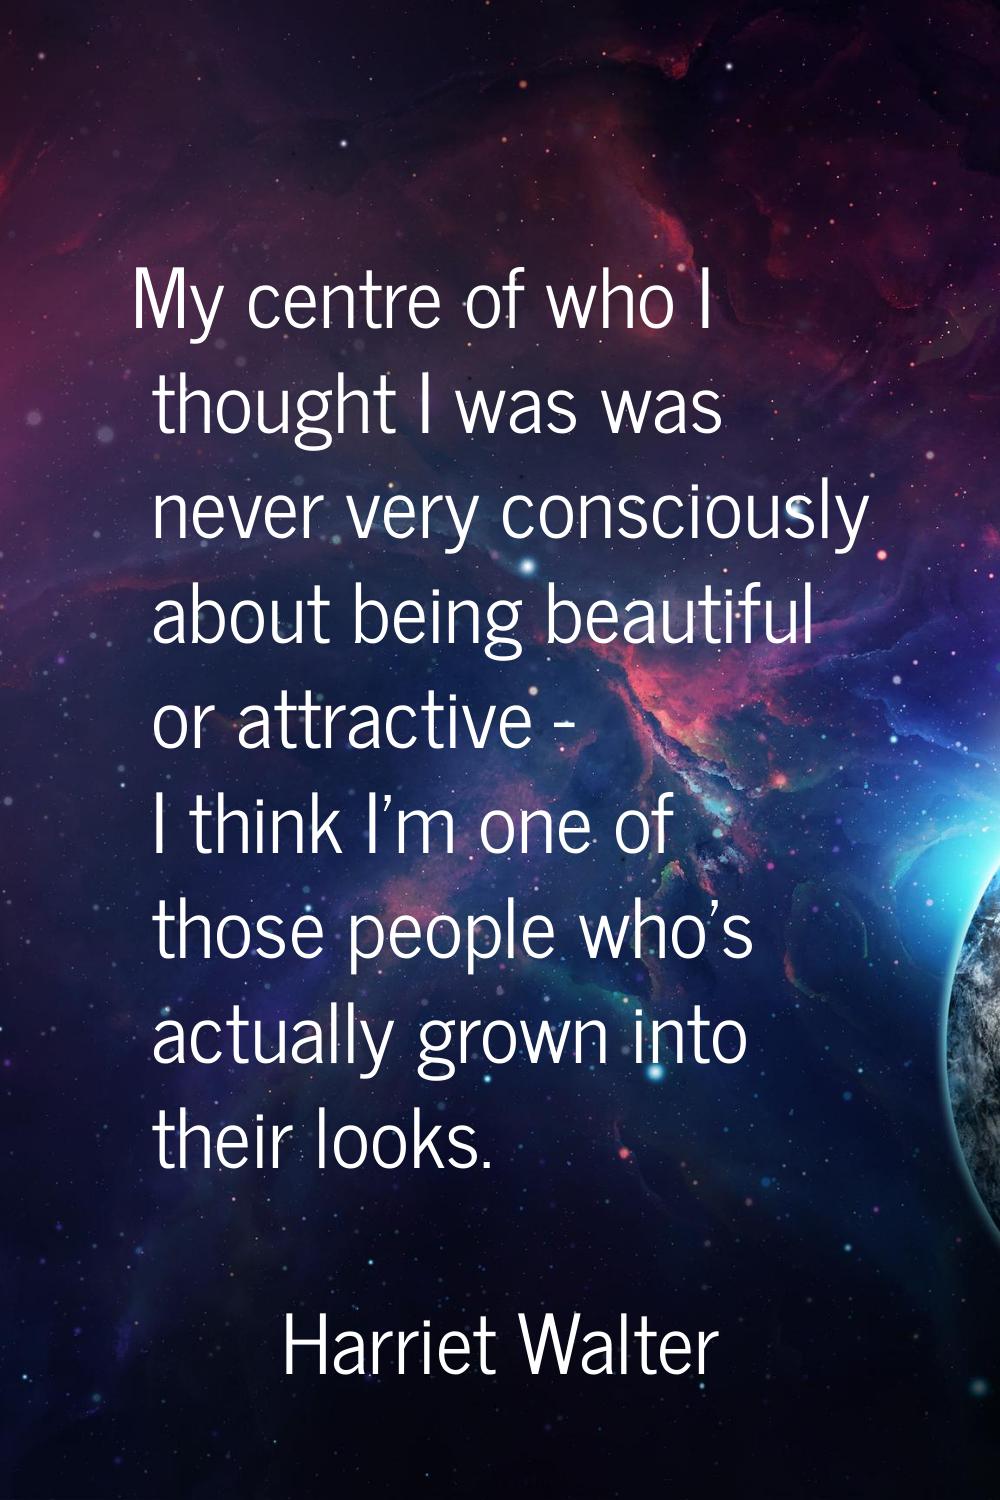 My centre of who I thought I was was never very consciously about being beautiful or attractive - I